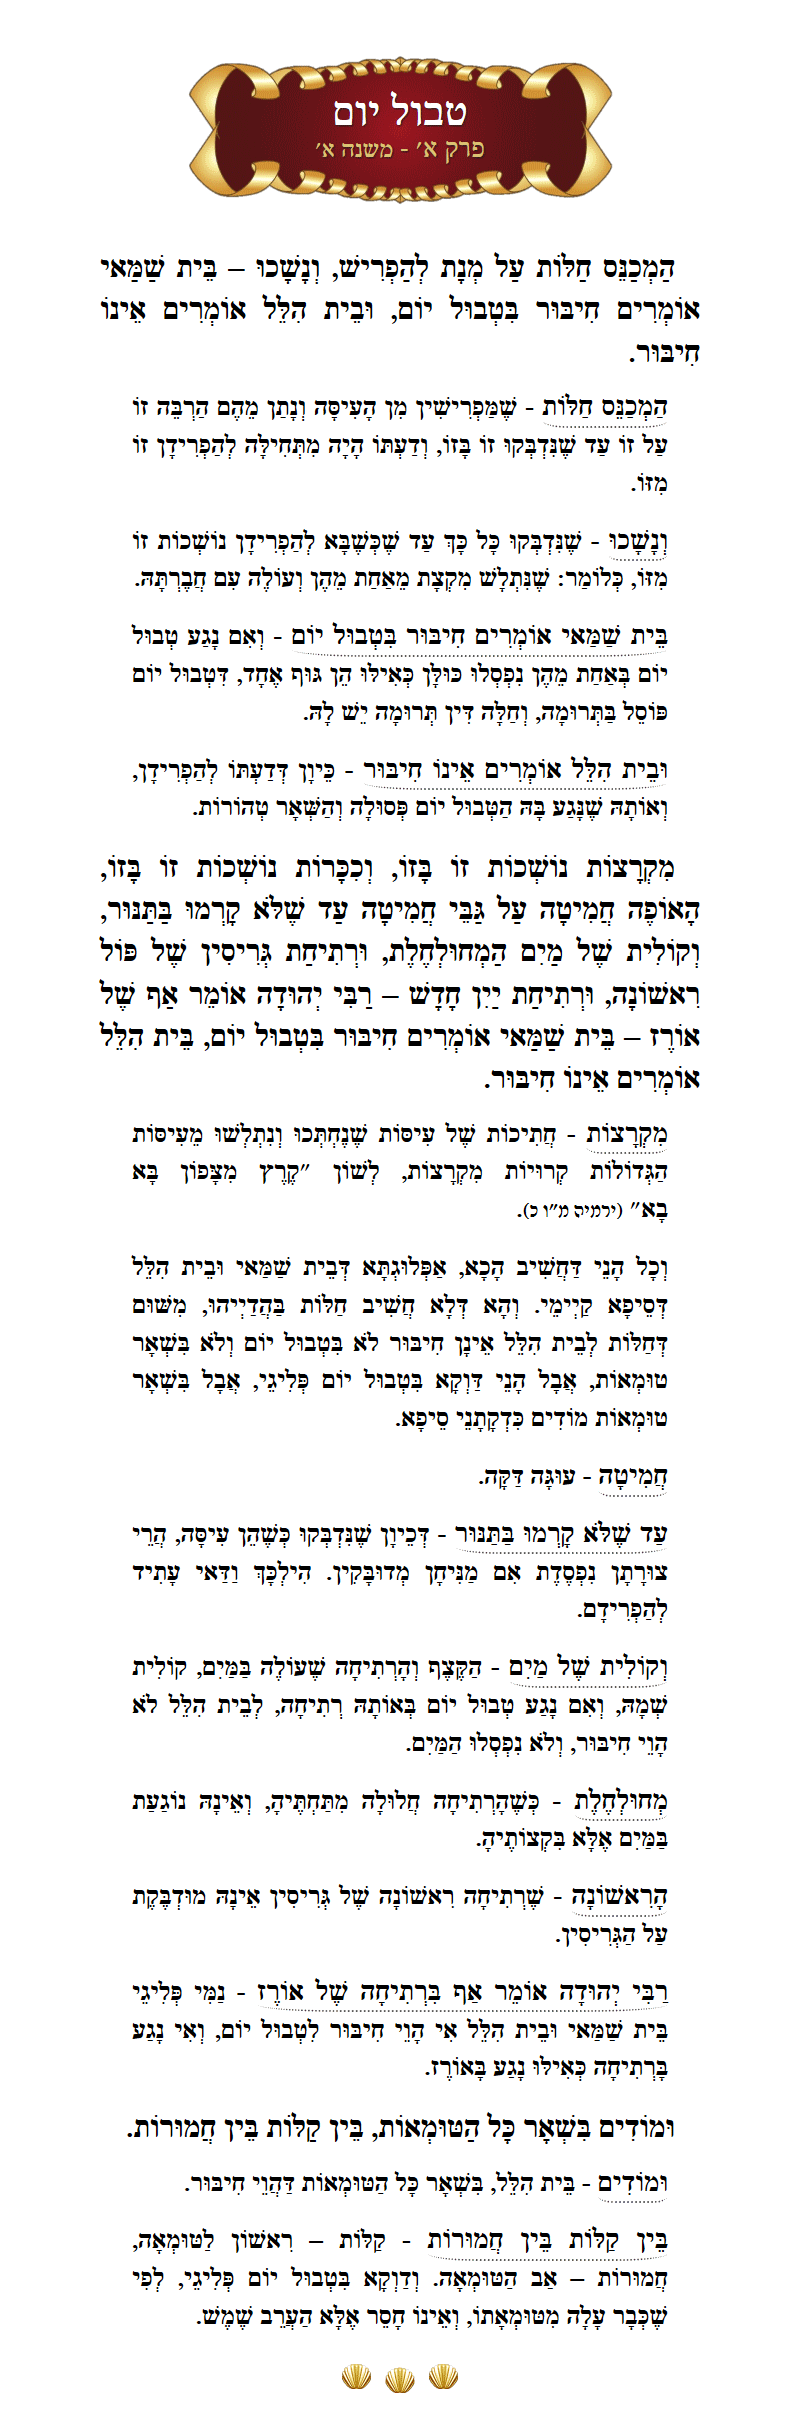 Masechta Tevul Yom Chapter 1 Mishnah 1 with commentary